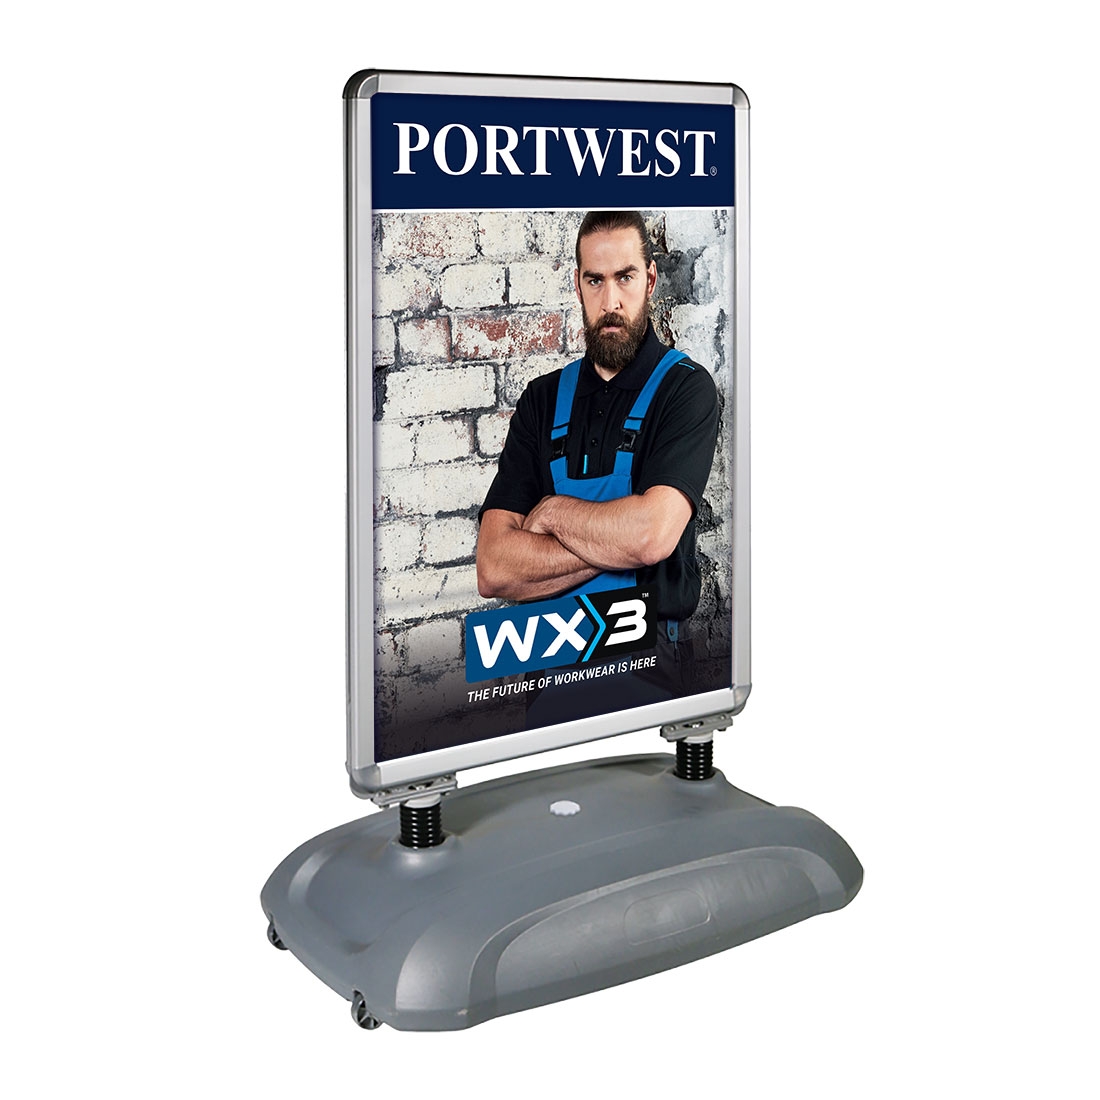 Portwest Z640 Water Base Pavement Sign-0